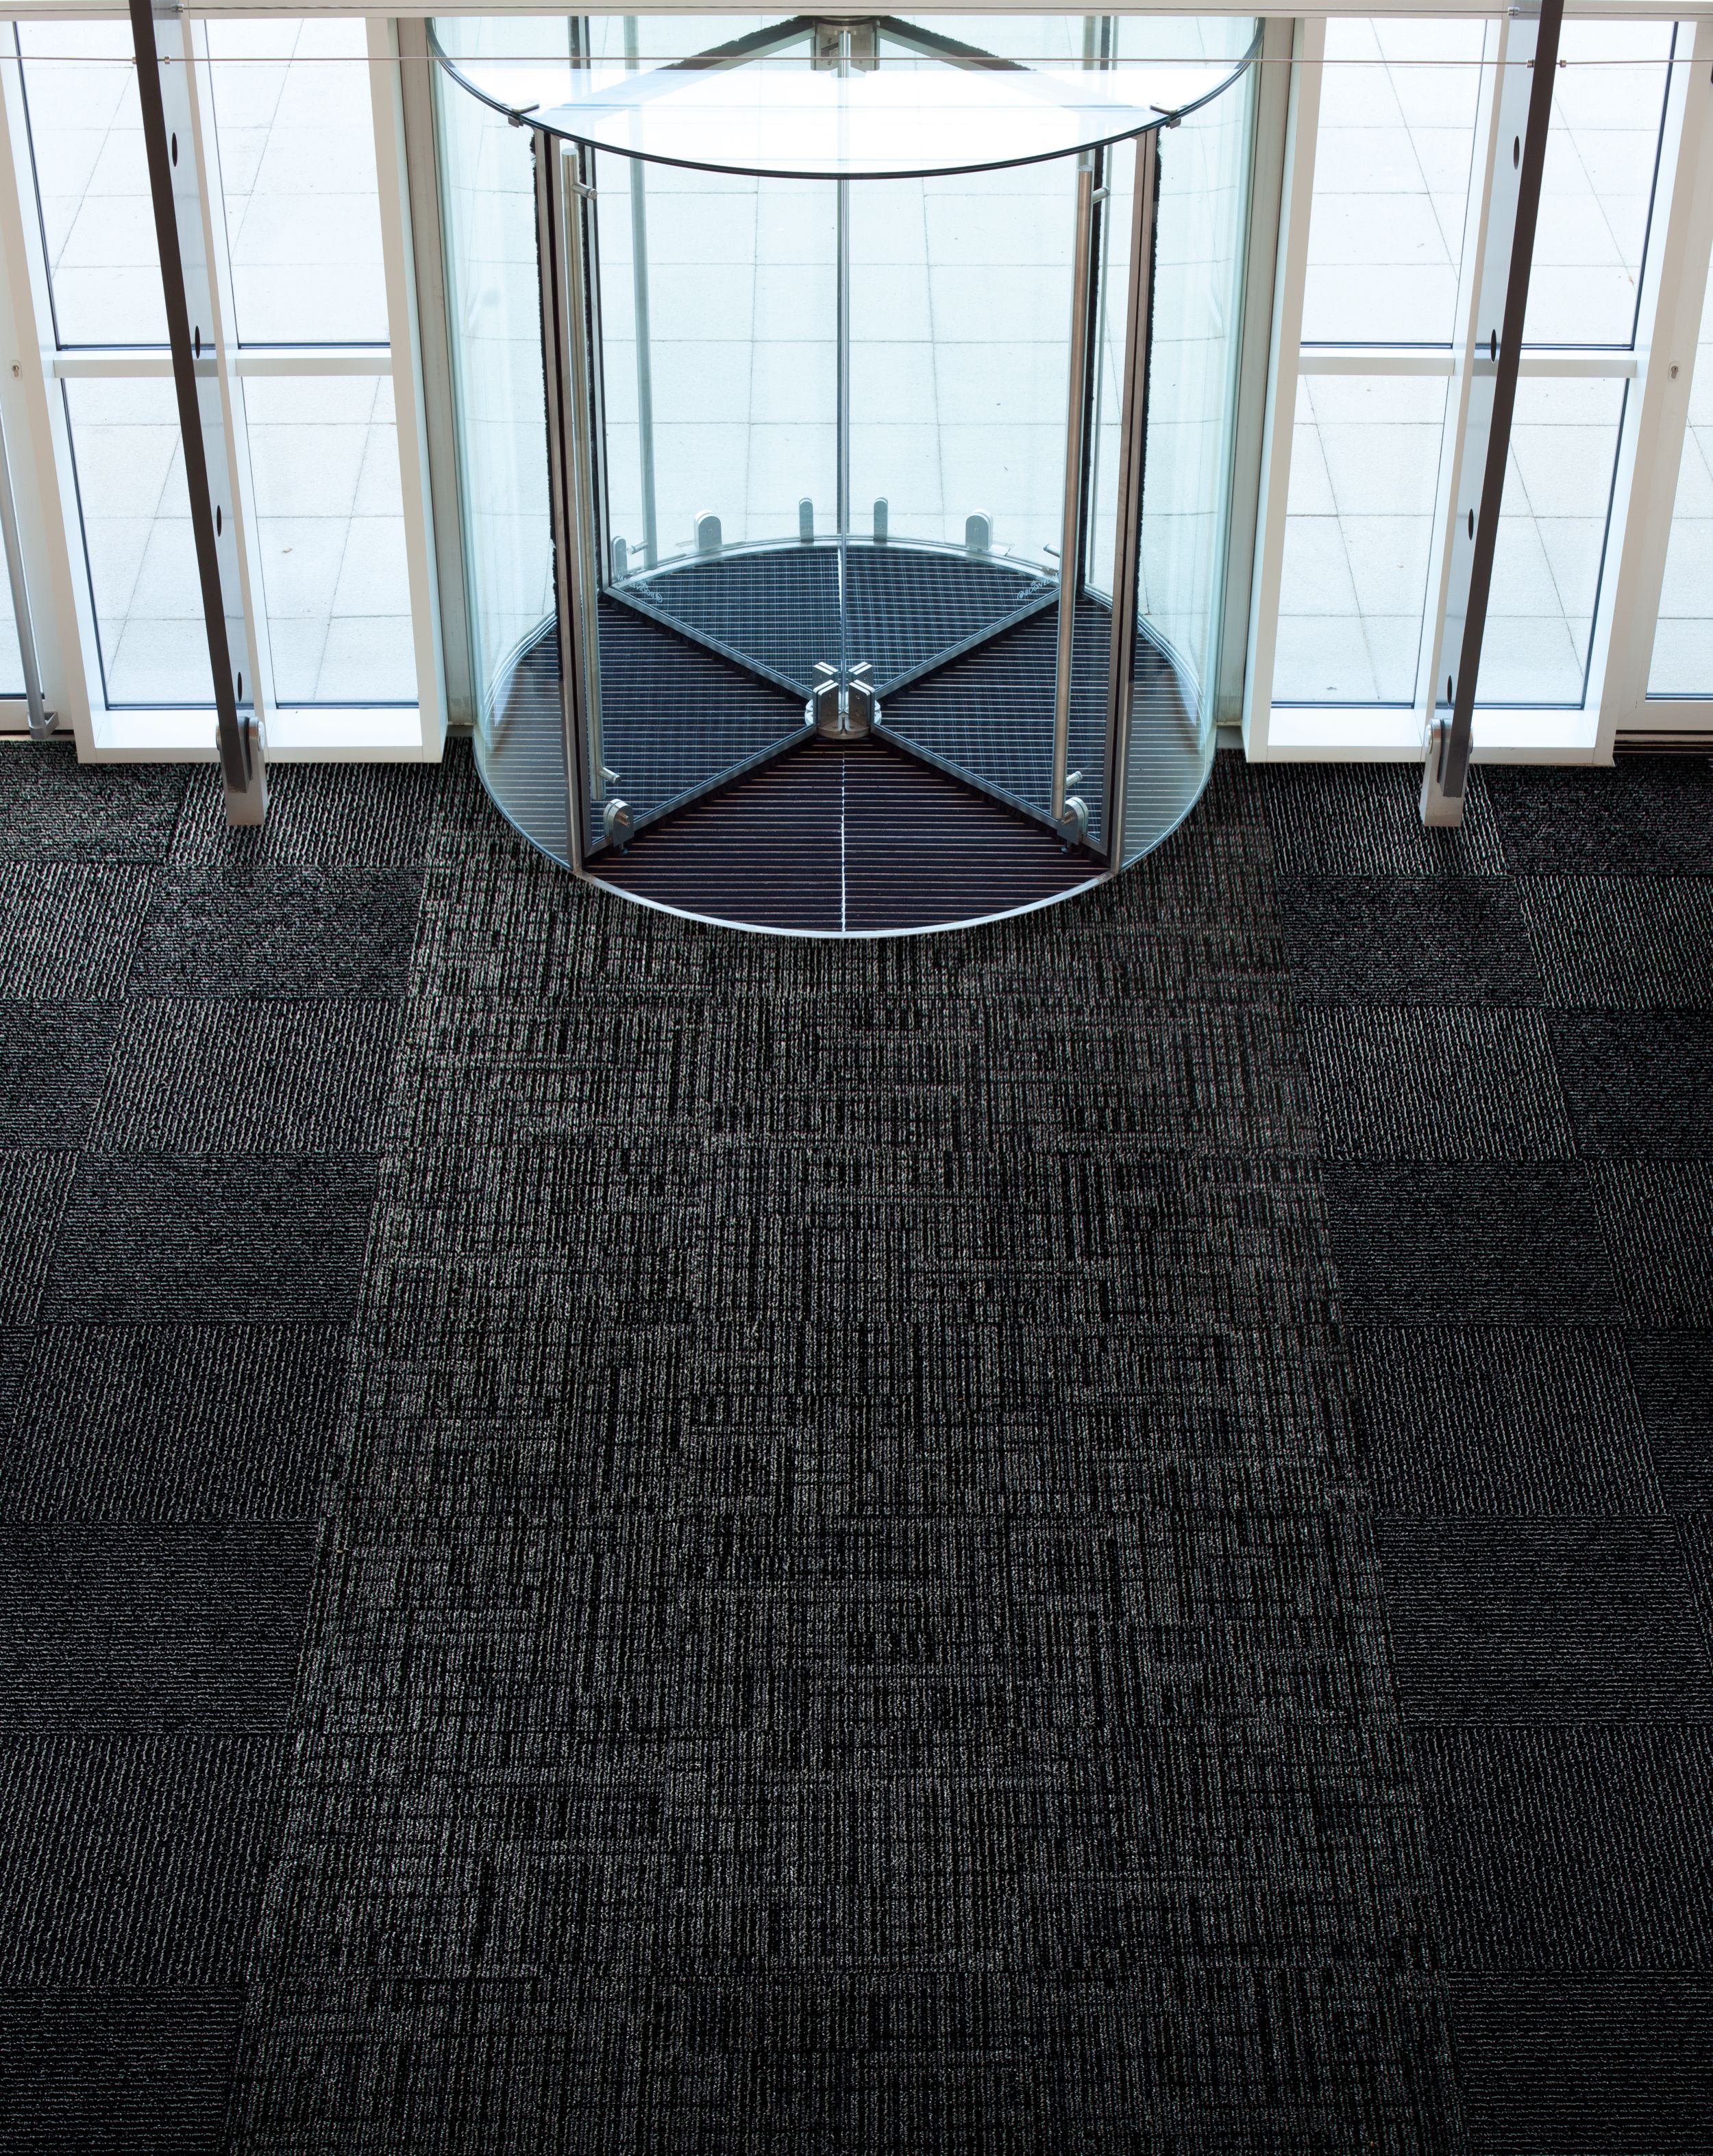 Interface SR699 and SR899 carpet tile in entryway with revolving door numéro d’image 6